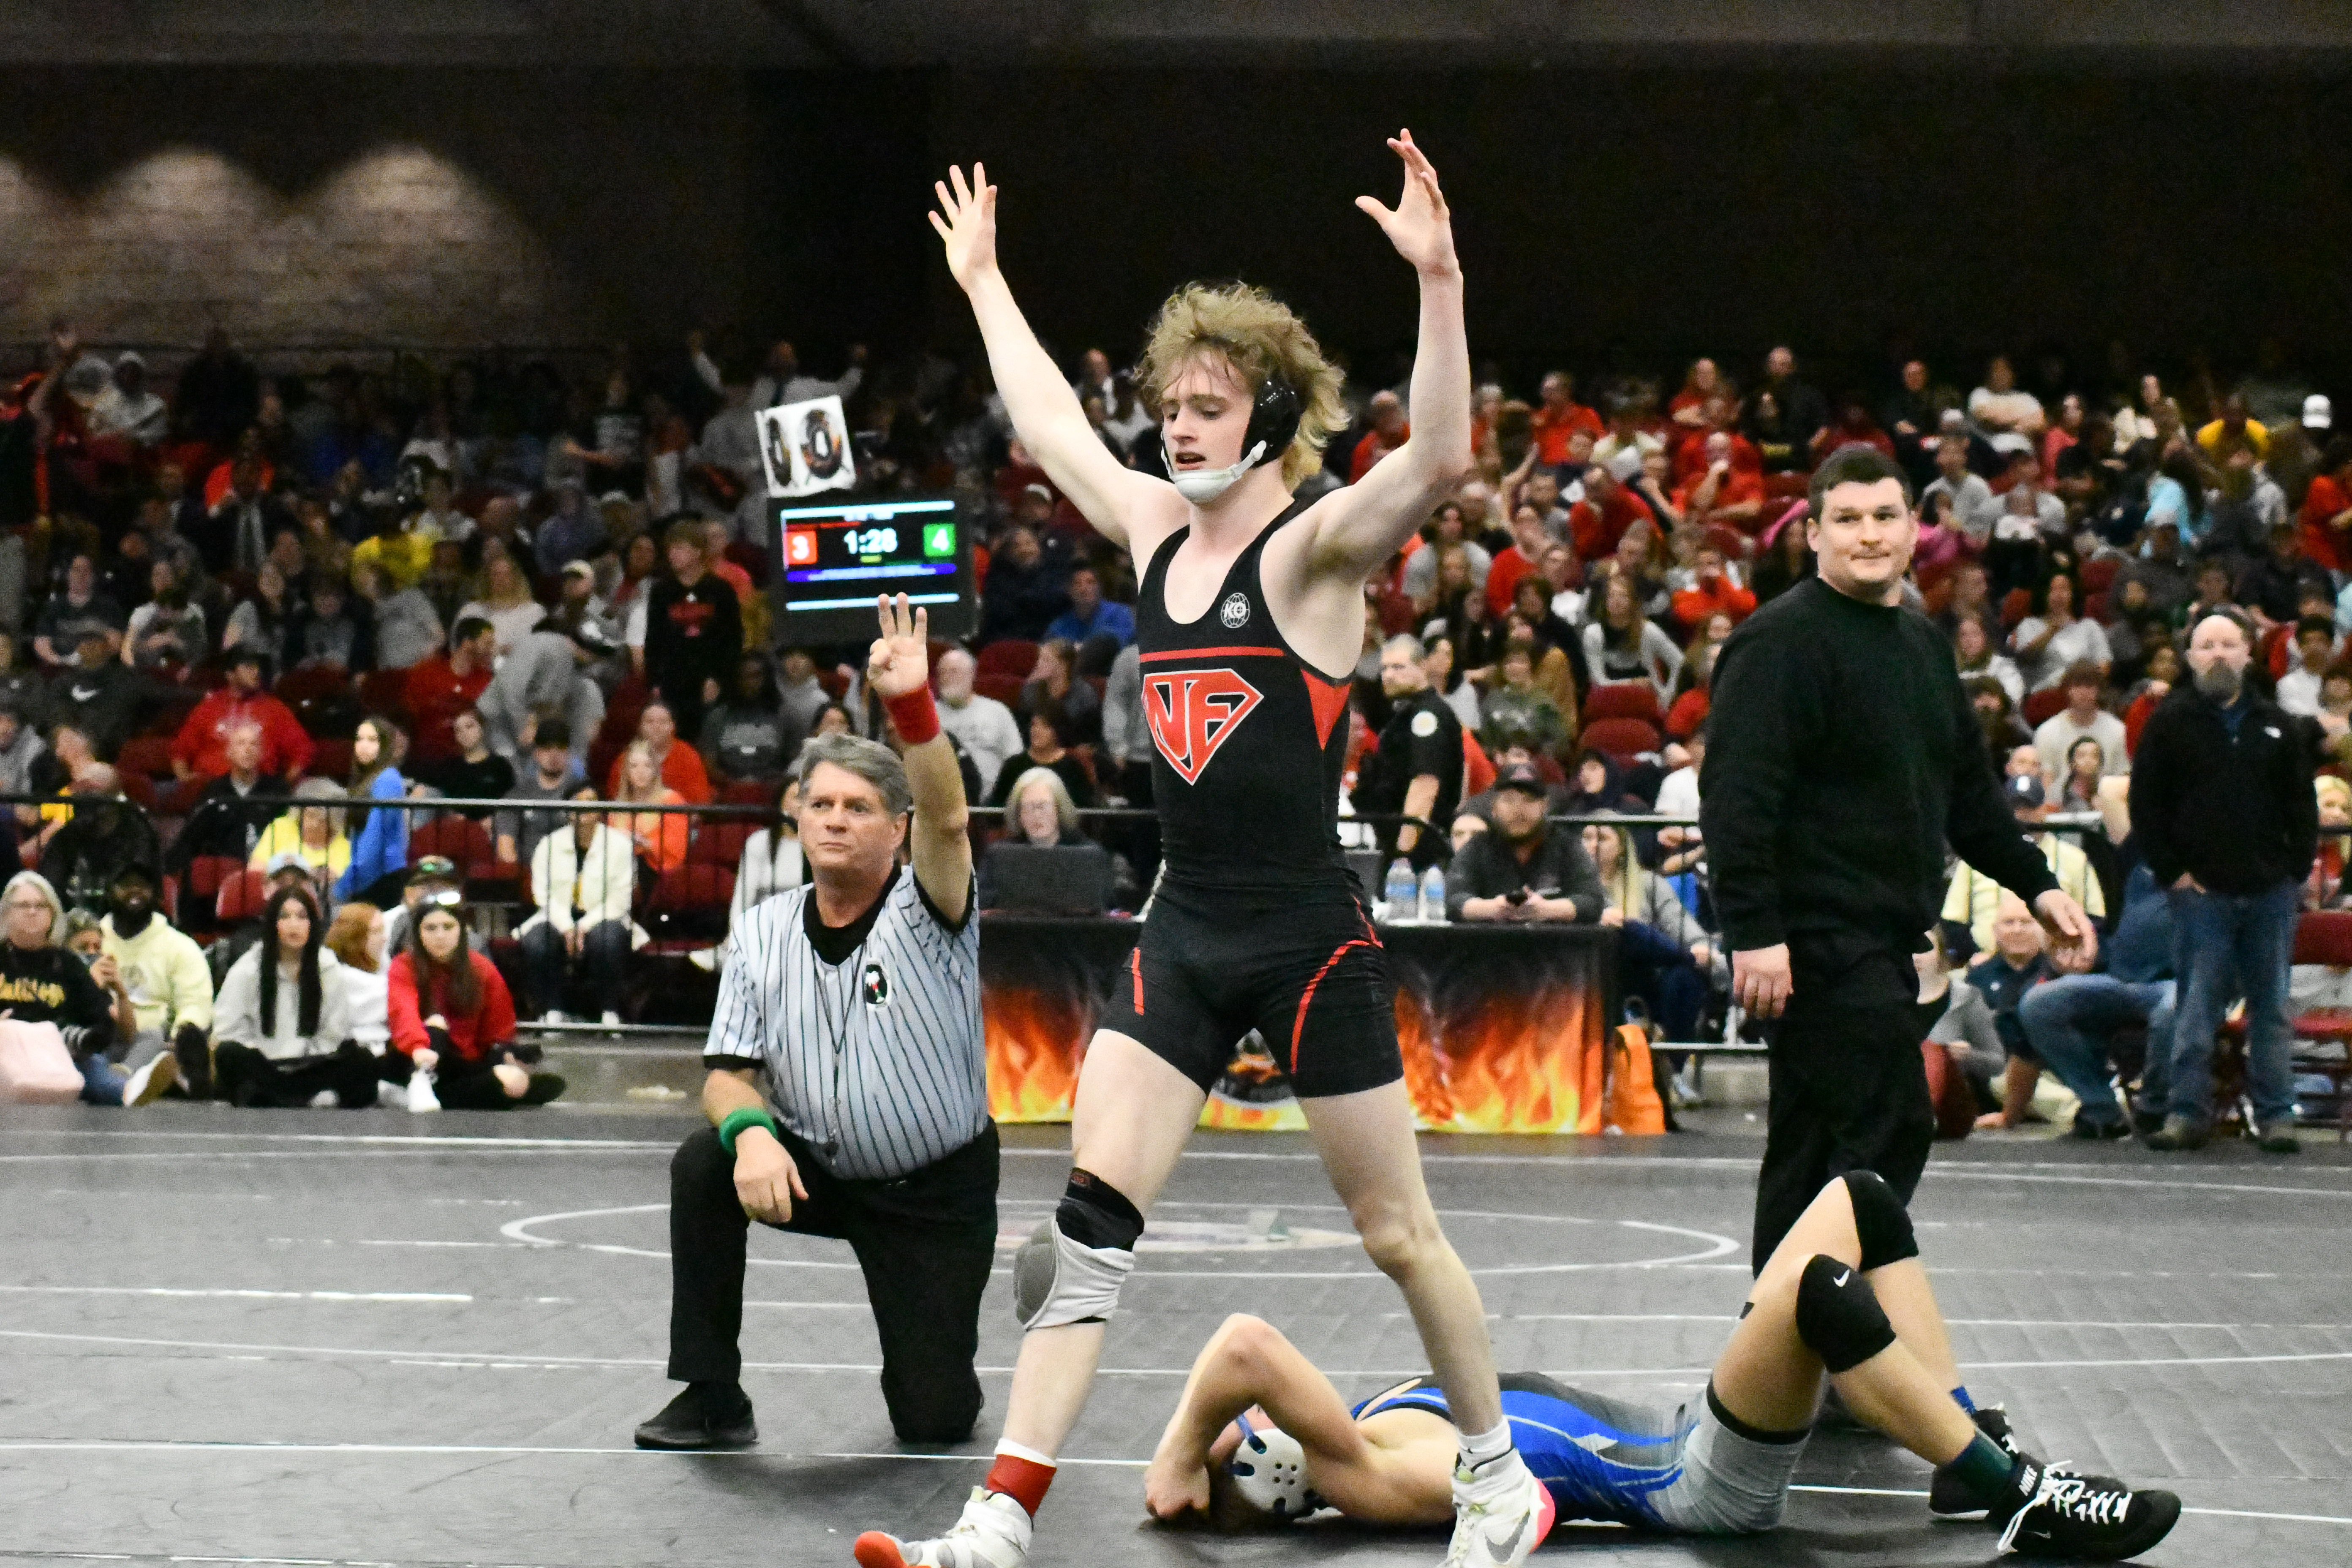 Two wrestling state champions crowned making history for Falcons, Copperheads